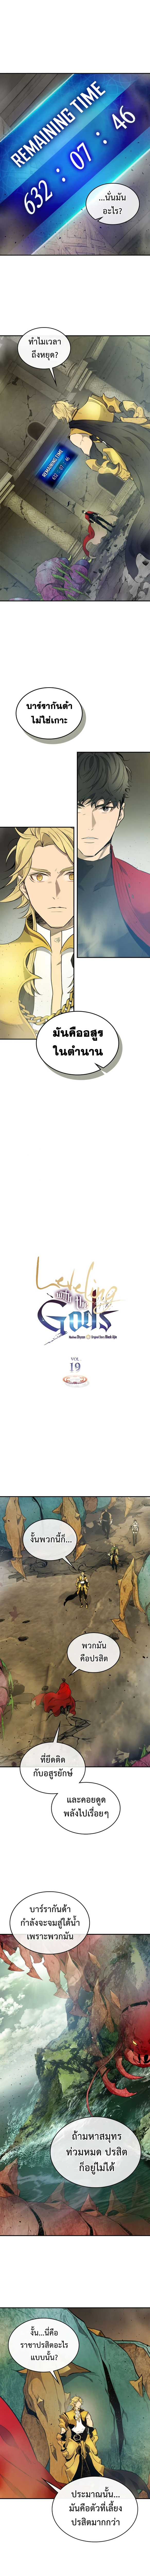 Leveling With The Gods 19 (2)